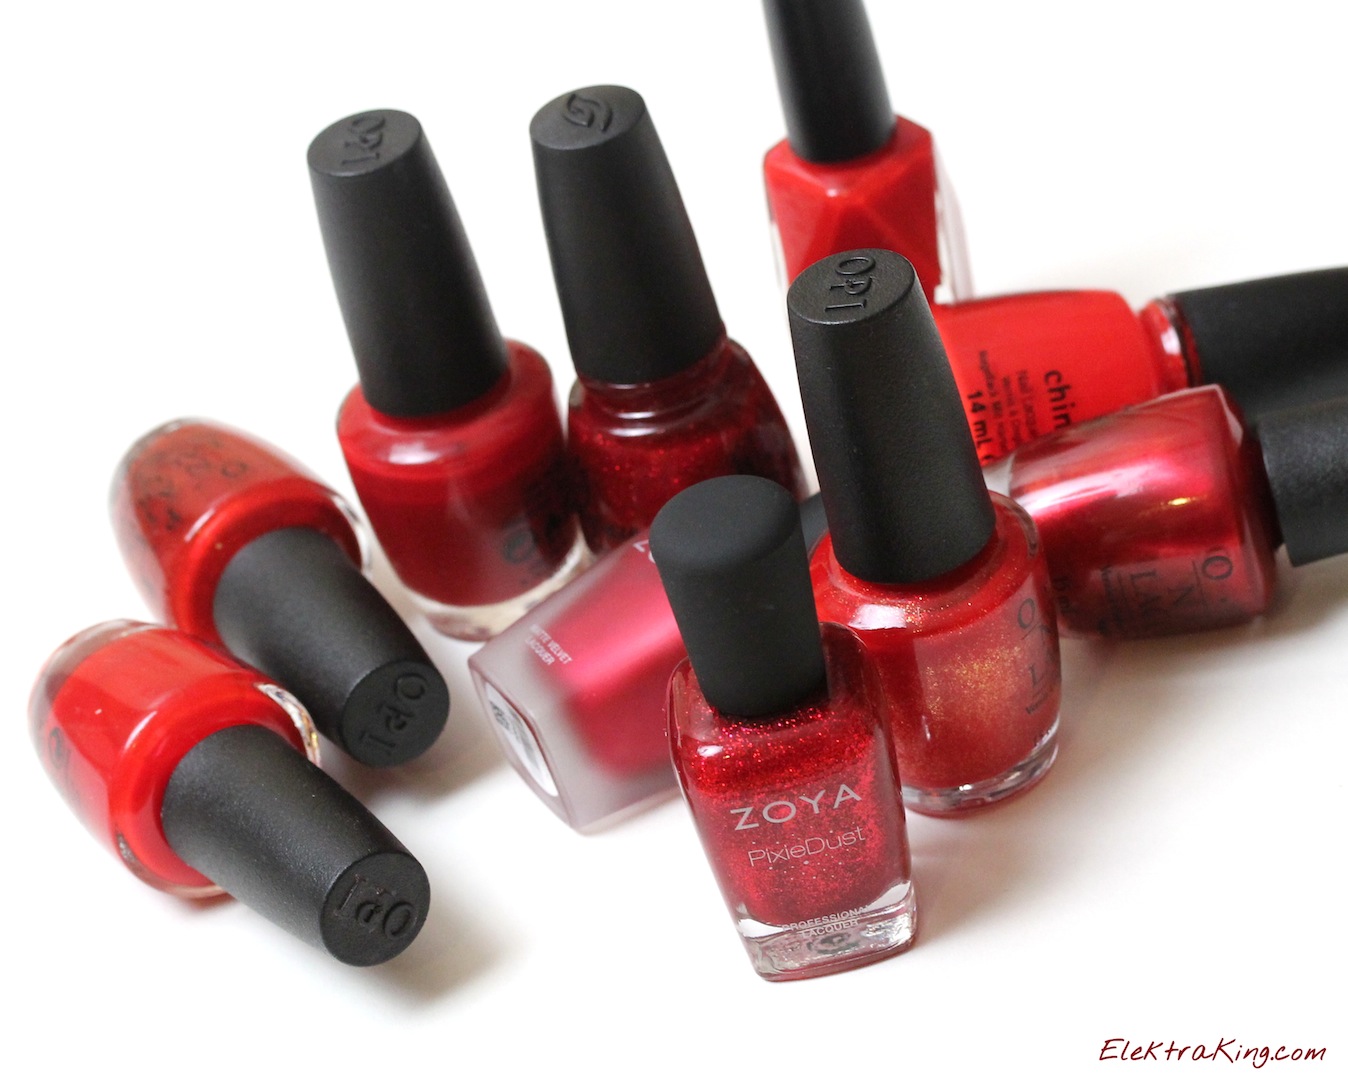 Holiday Red Polishes